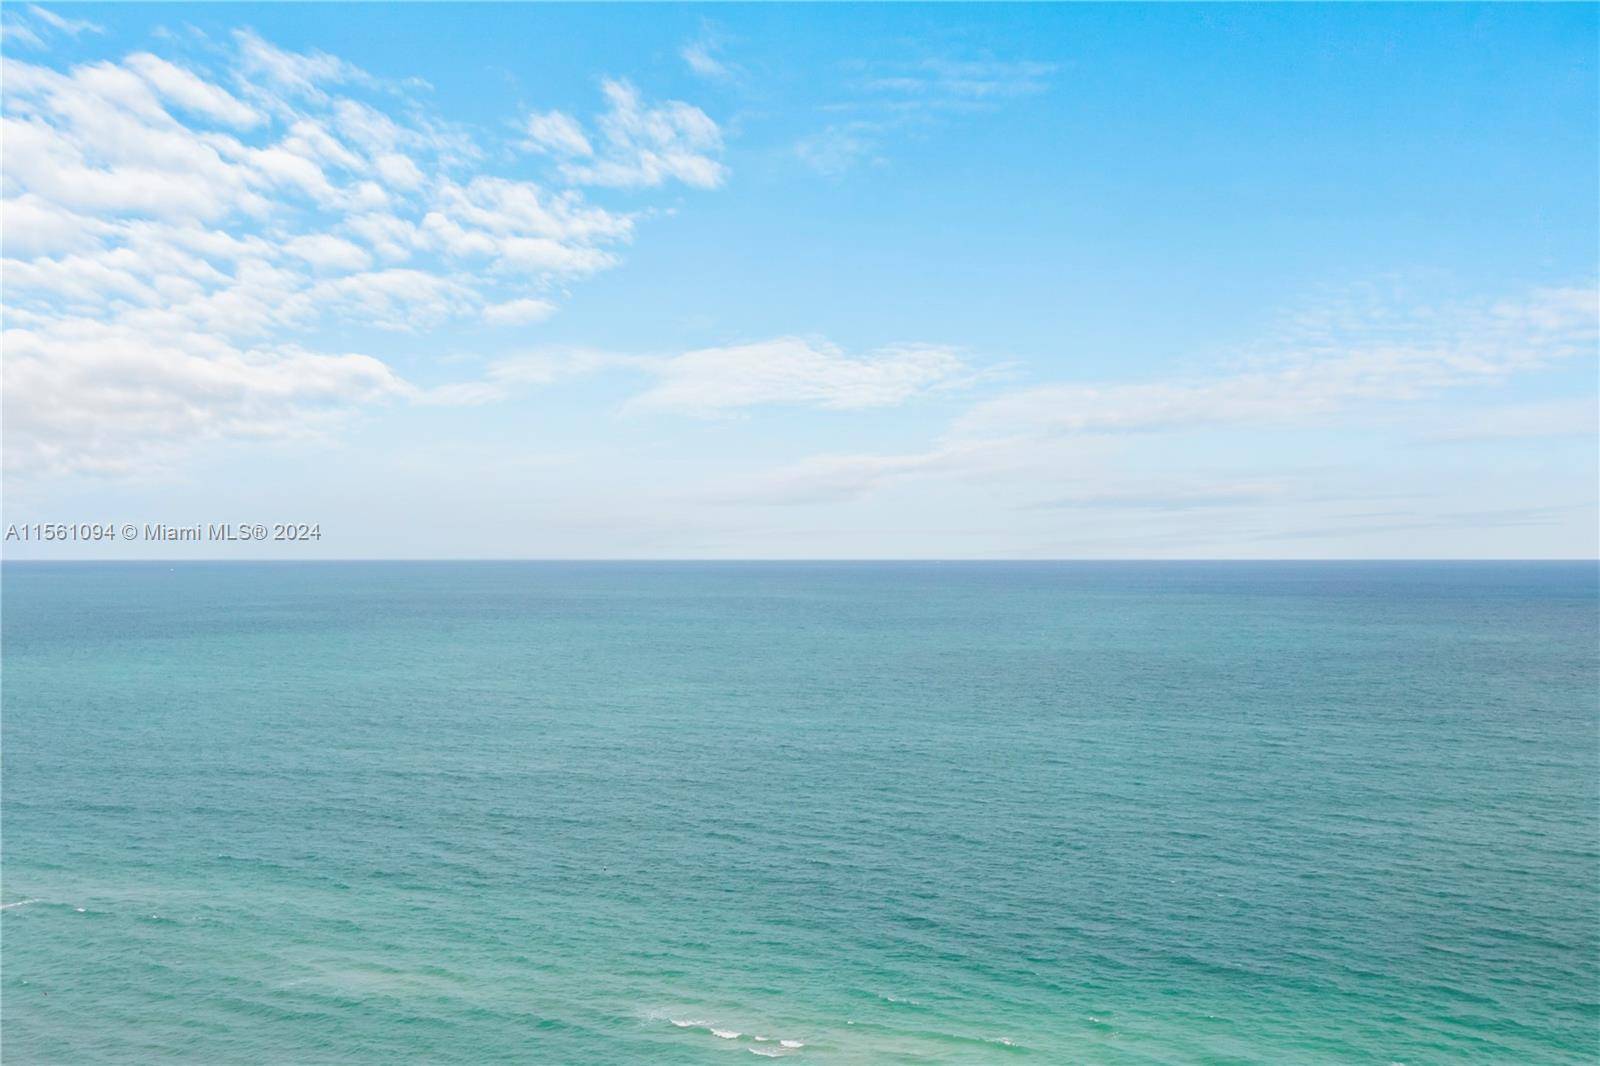 Recently remodeled high floor unit, offering captivating views of the ocean, bay, and Miami's skyline through floor to ceiling glass that open to an oversized terrace.